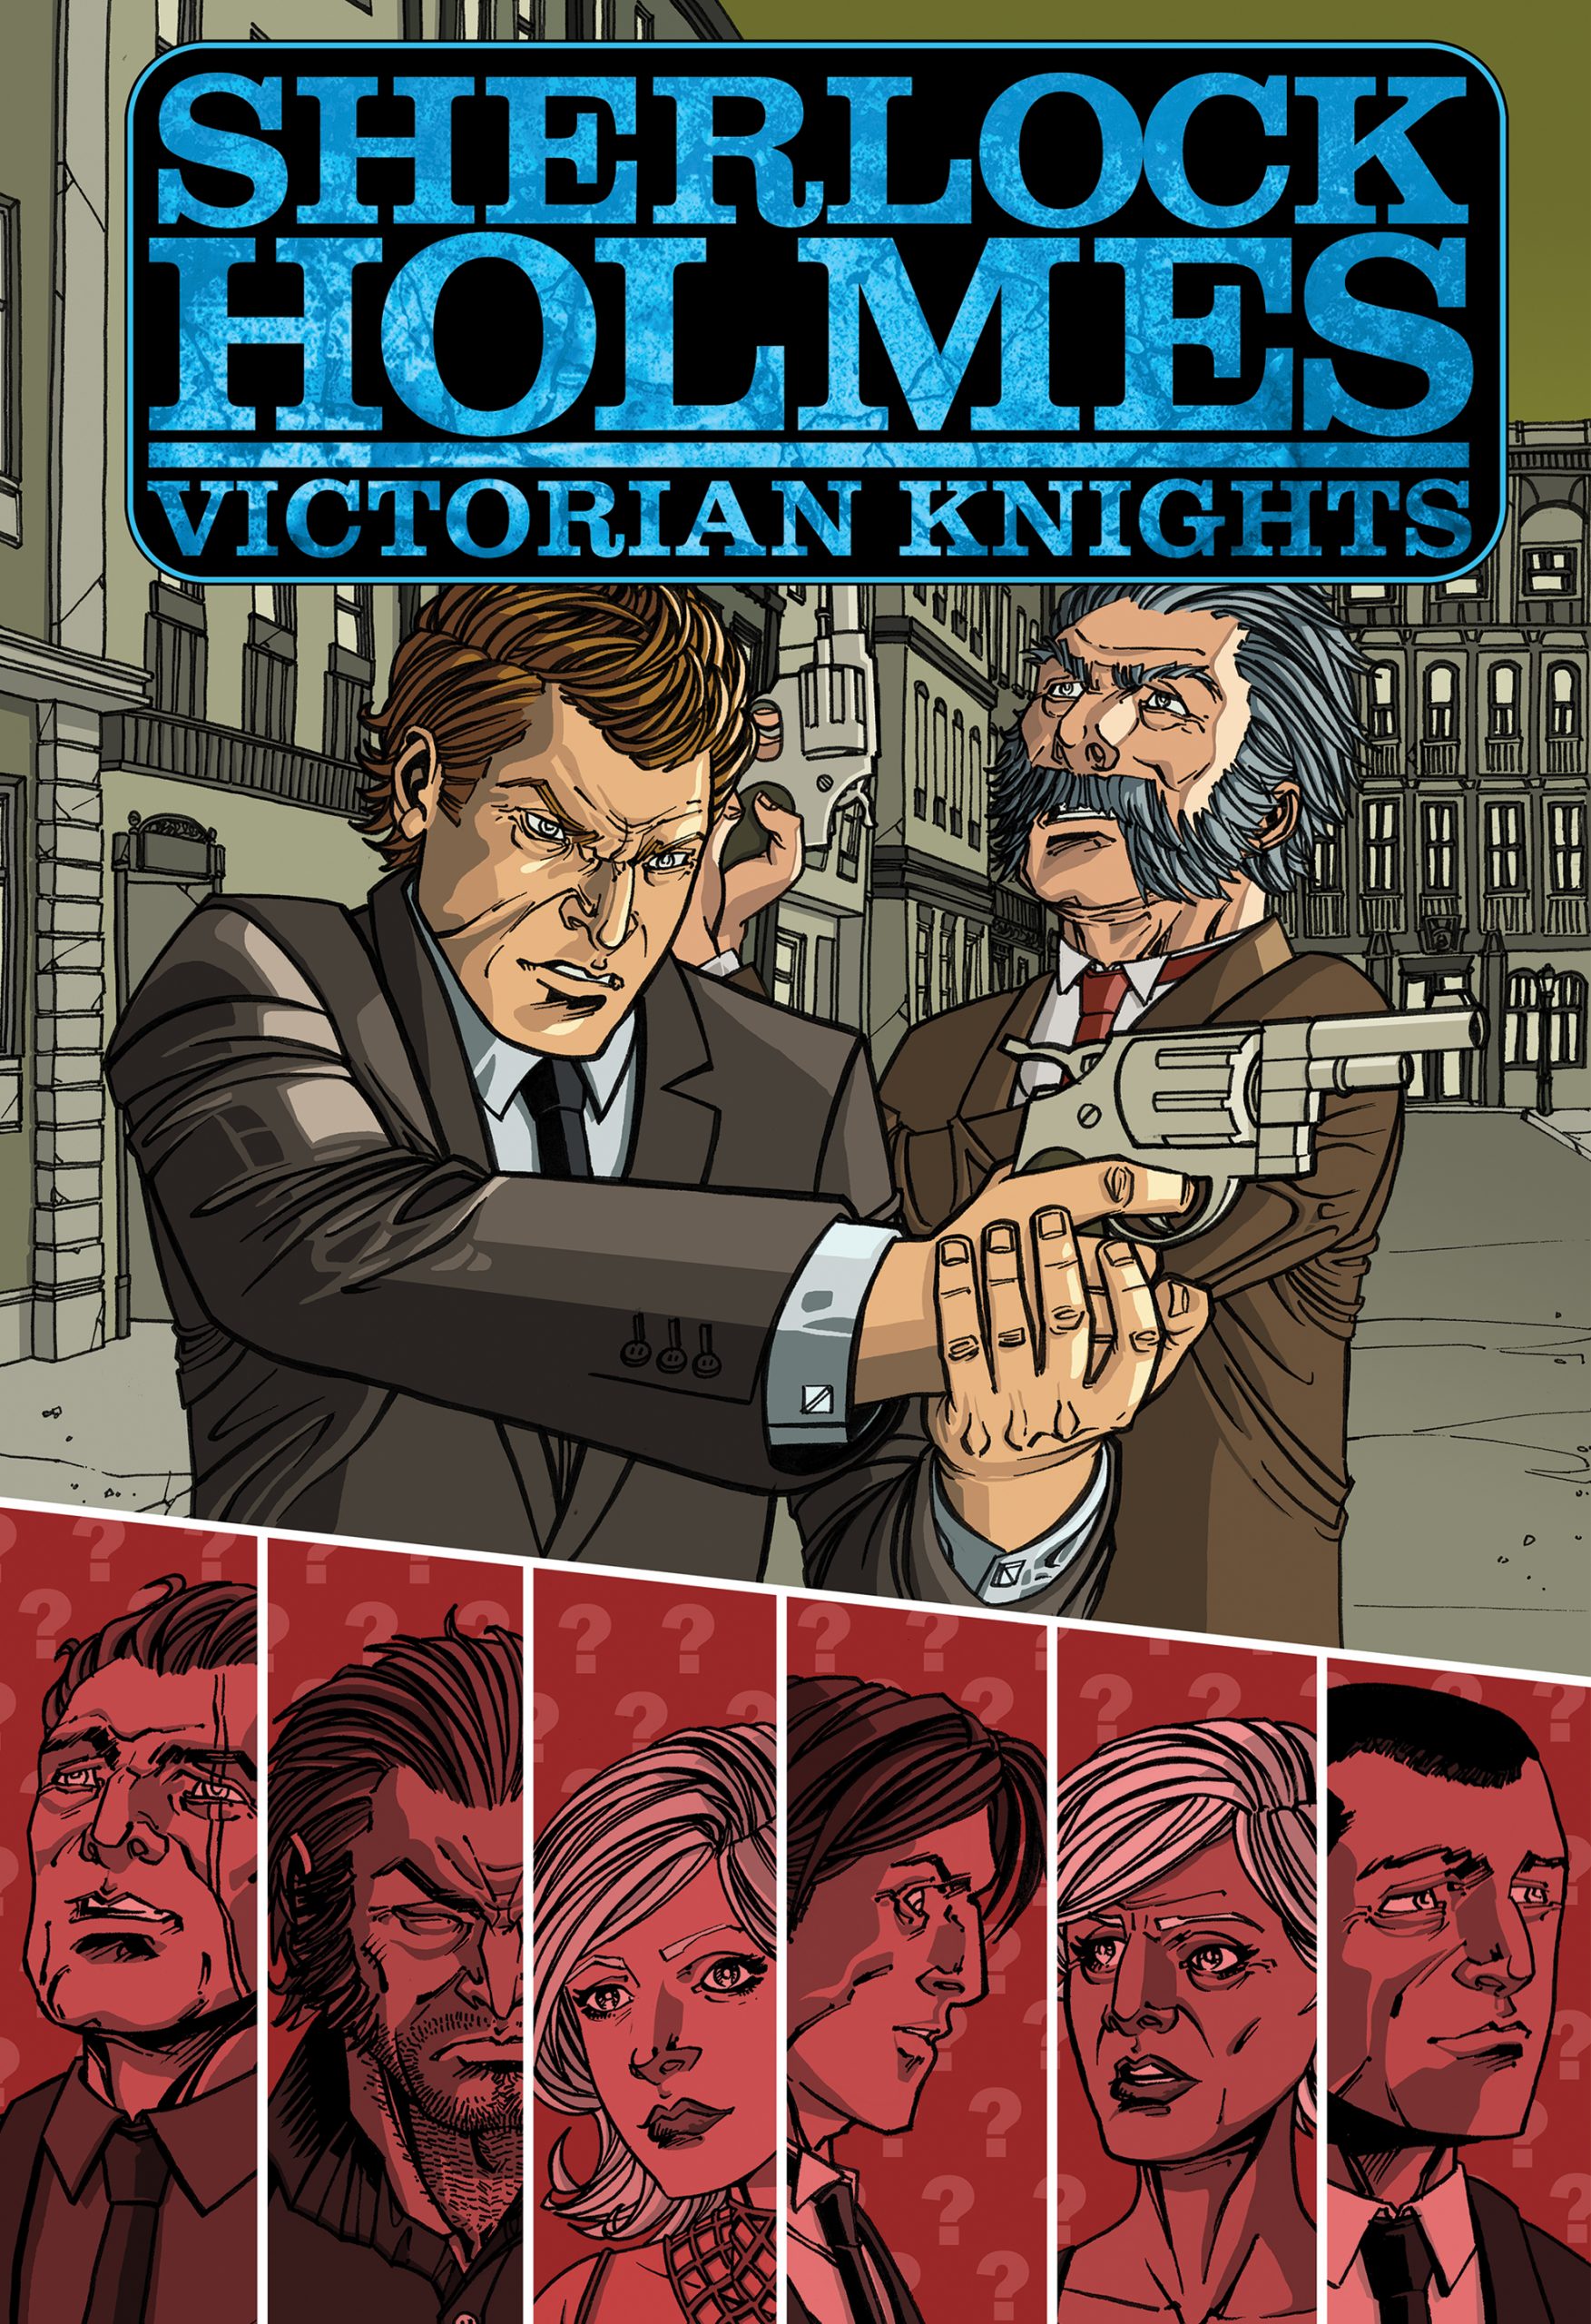 OUT TODAY: SHERLOCK HOLMES, VICTORIAN KNIGHTS GRAPHC NOVEL - TidalWave